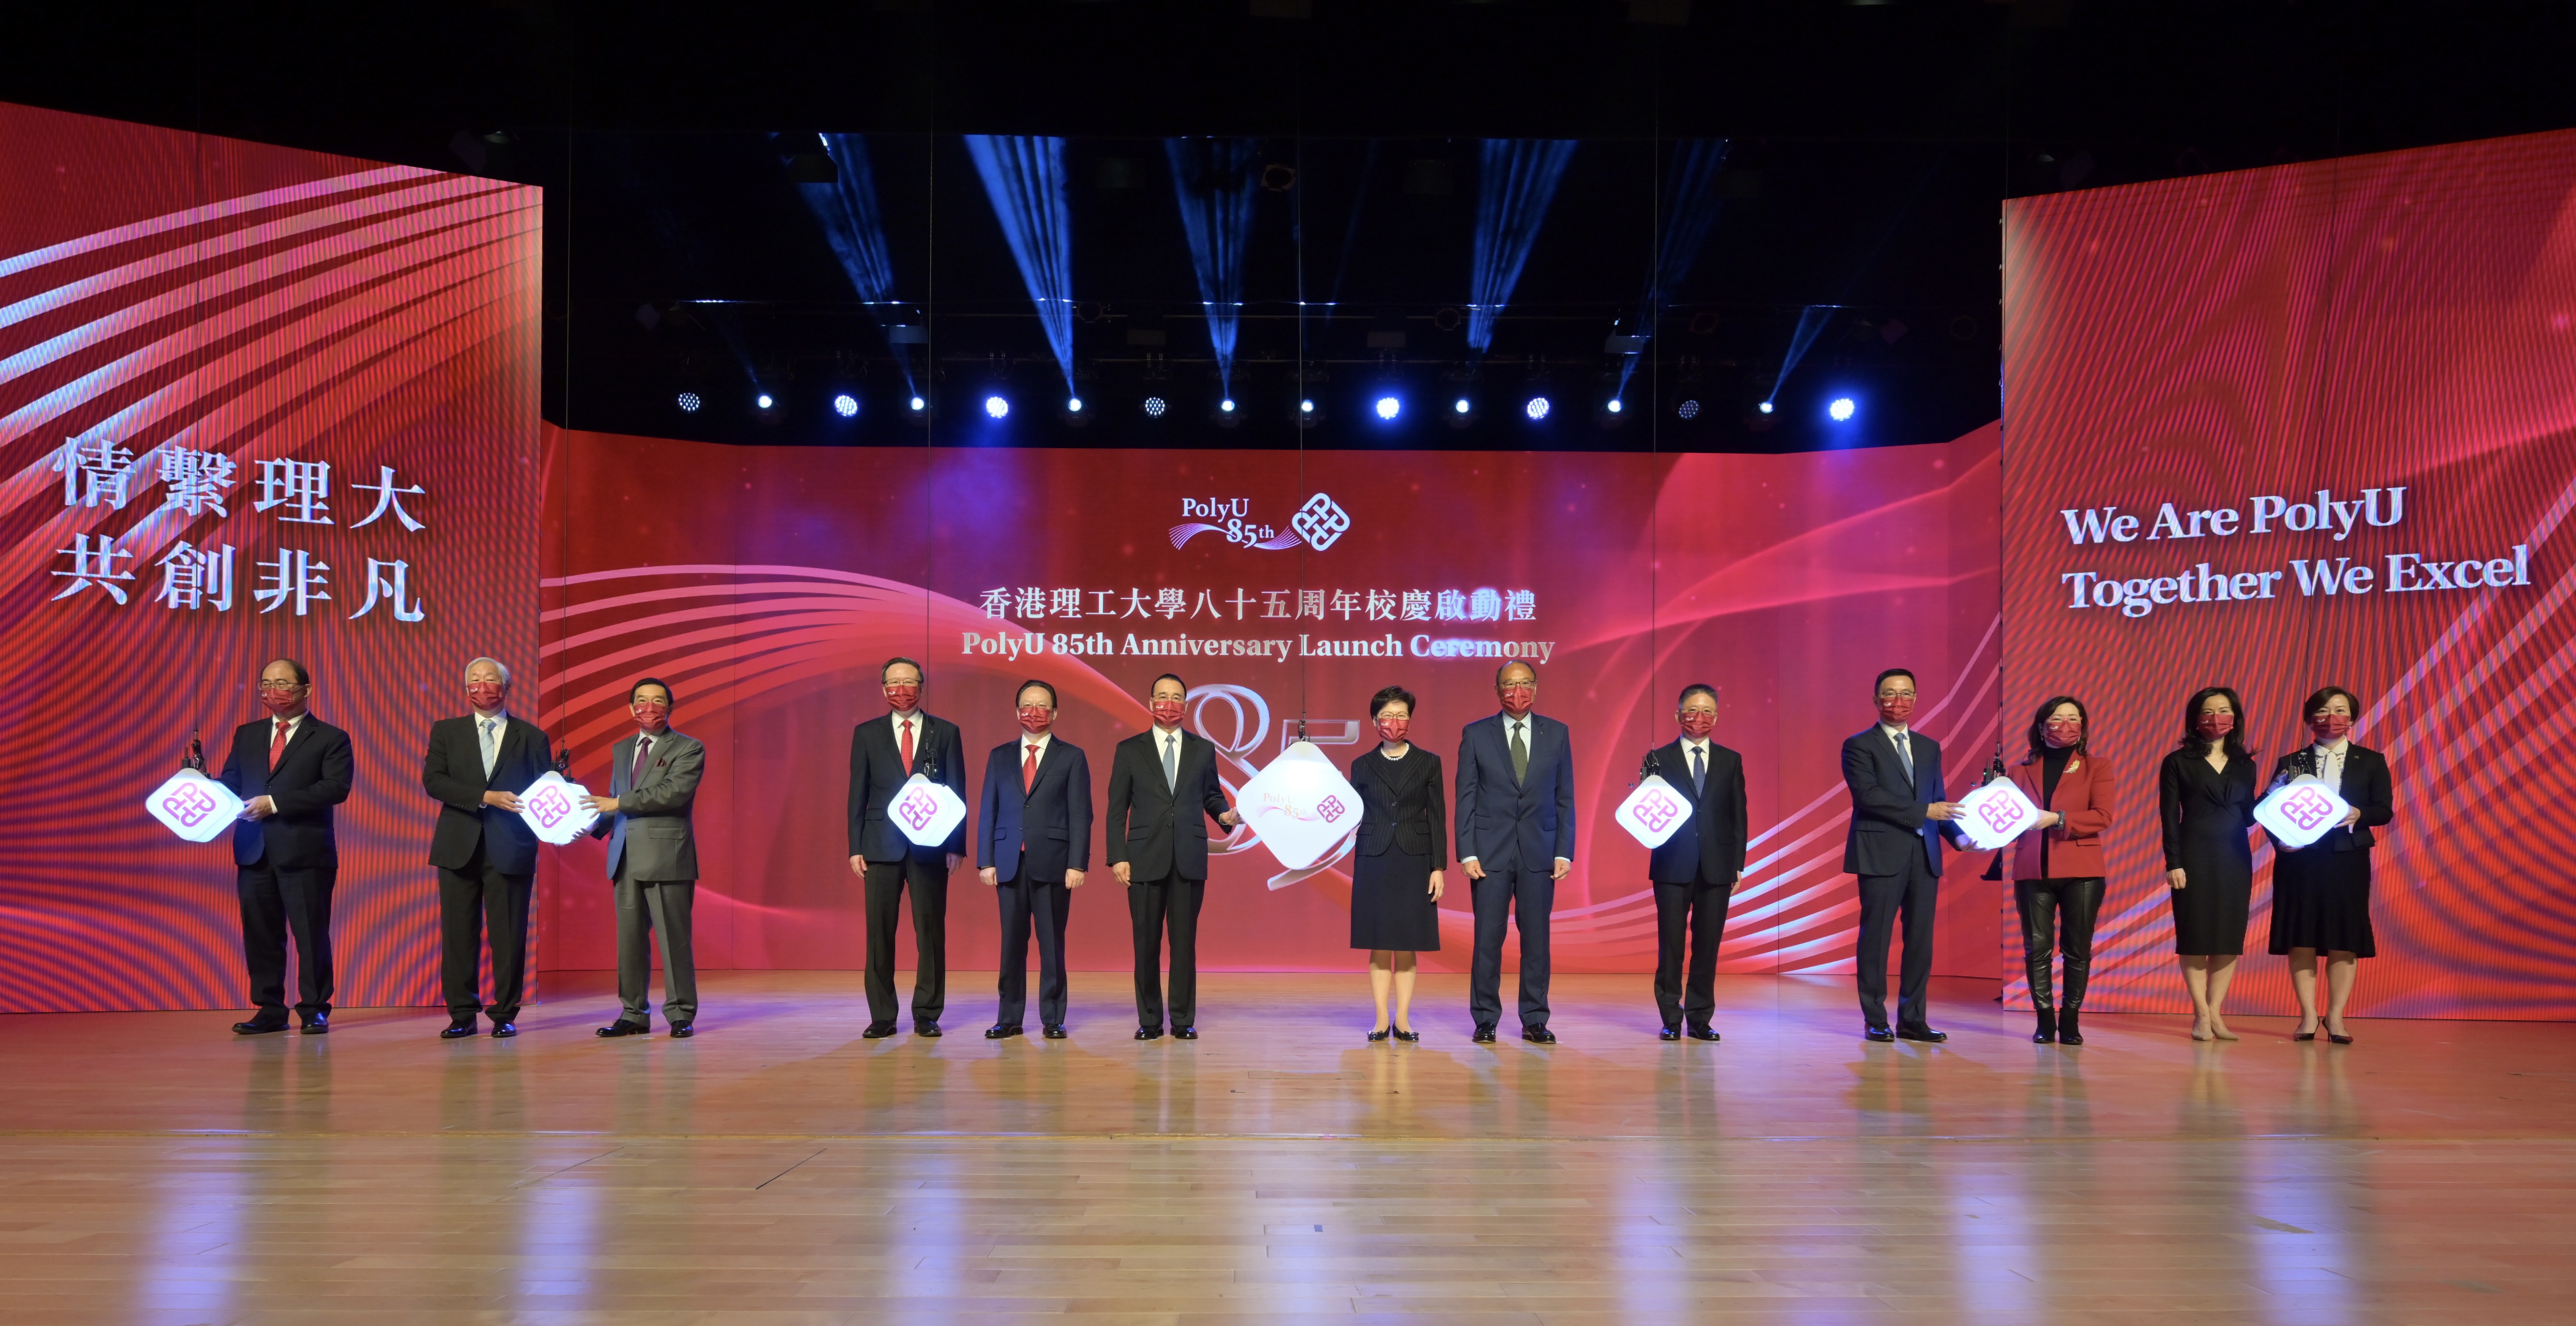 The Chief Executive, Mrs Carrie Lam, attended the PolyU 85th Anniversary Launch Ceremony today (November 25). Photo shows (from third left) the Chairman of the University Grants Committee, Mr Carlson Tong; the President of the Hong Kong Polytechnic University (PolyU), Professor Teng Jinguang; Deputy Director of the Liaison Office of the Central People's Government in the Hong Kong Special Administrative Region (HKSAR) Mr Tan Tieniu; the Commissioner of the Ministry of Foreign Affairs of the People's Republic of China in the HKSAR, Mr Liu Guangyuan; Mrs Lam; the Chairman of the Council of PolyU, Dr Lam Tai-fai; the Director-General of the Department of Educational, Scientific and Technological Affairs of the Liaison Office of the Central People's Government in the HKSAR, Professor Jiang Jianxiang; the Secretary for Education, Mr Kevin Yeung; and other guests officiating at the ceremony.